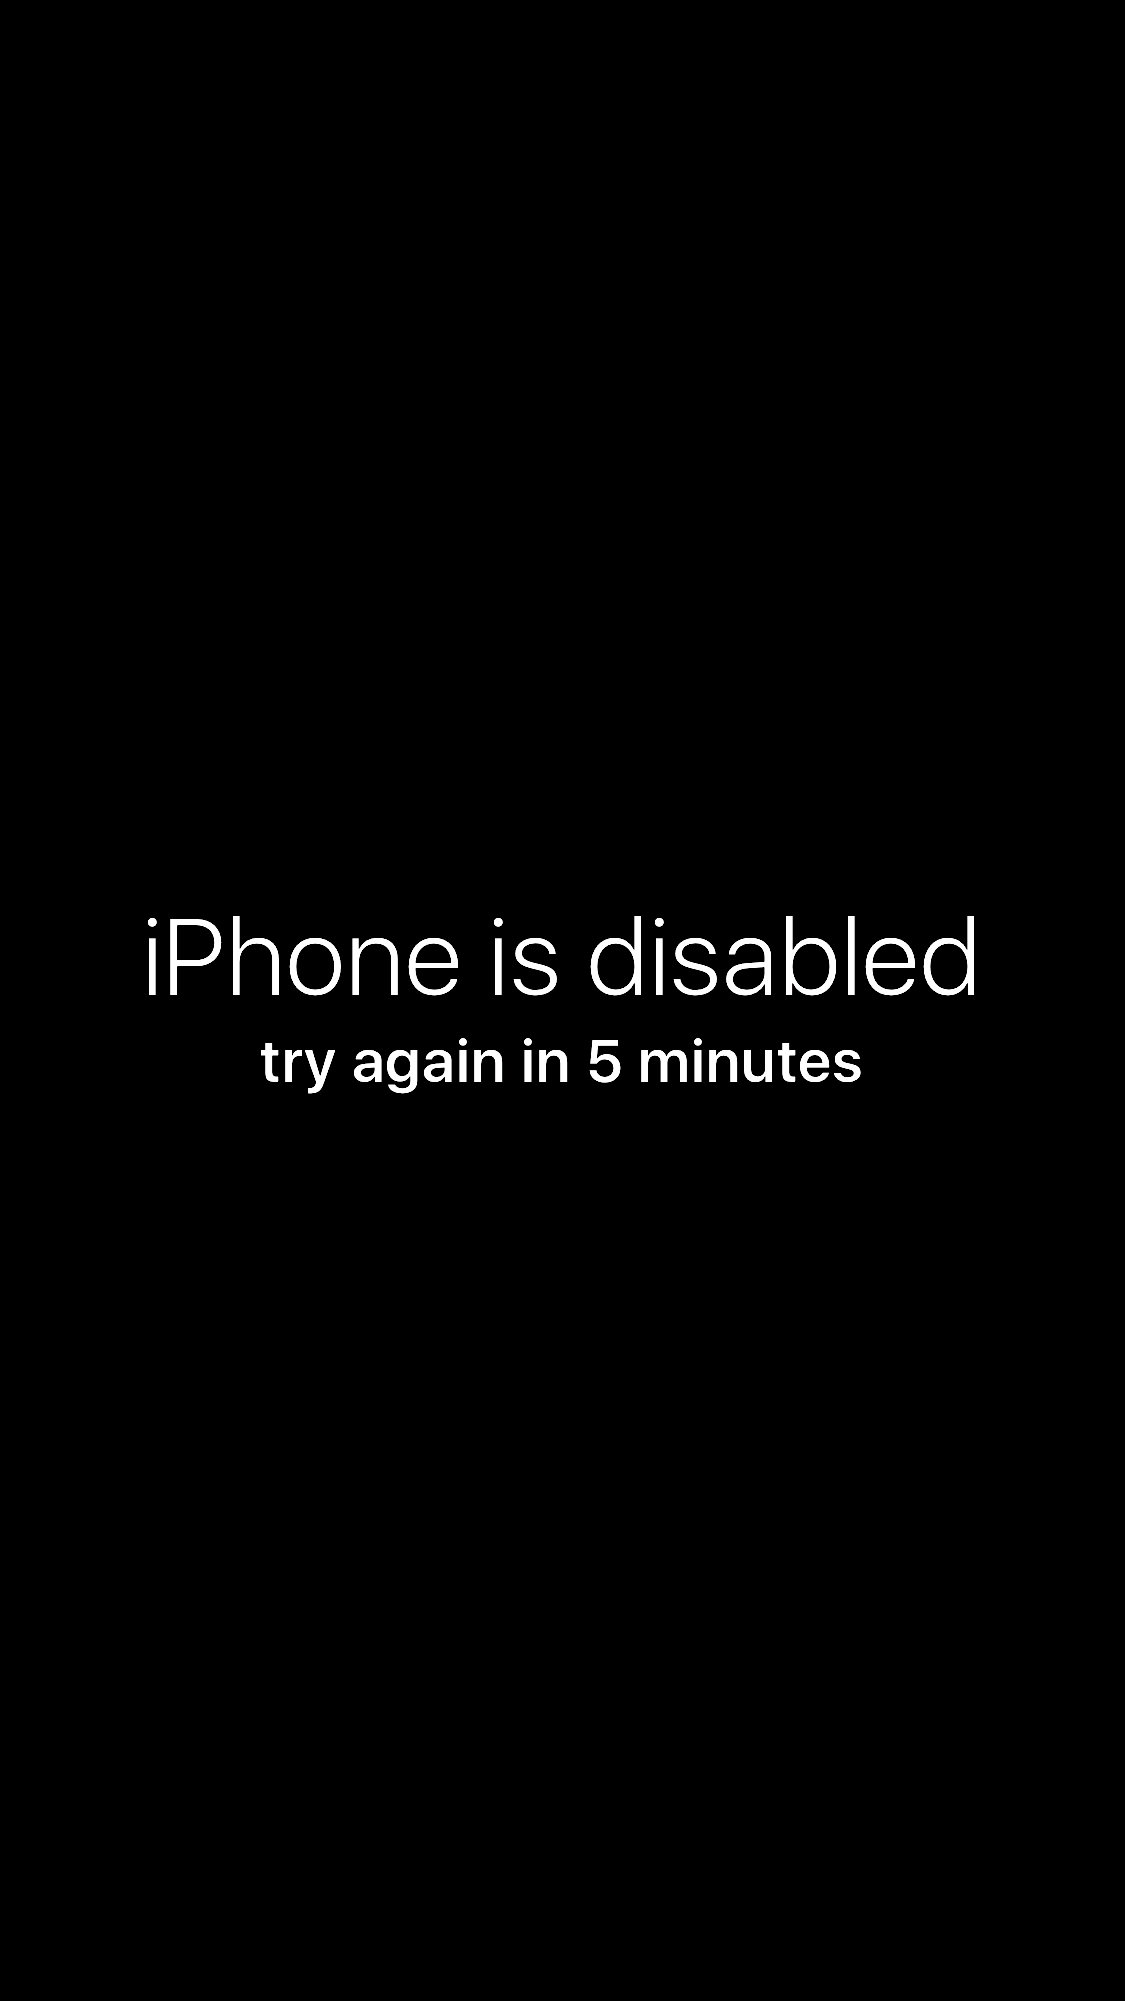 April Fools! The “iPhone is Disabled” Wallpaper Prank